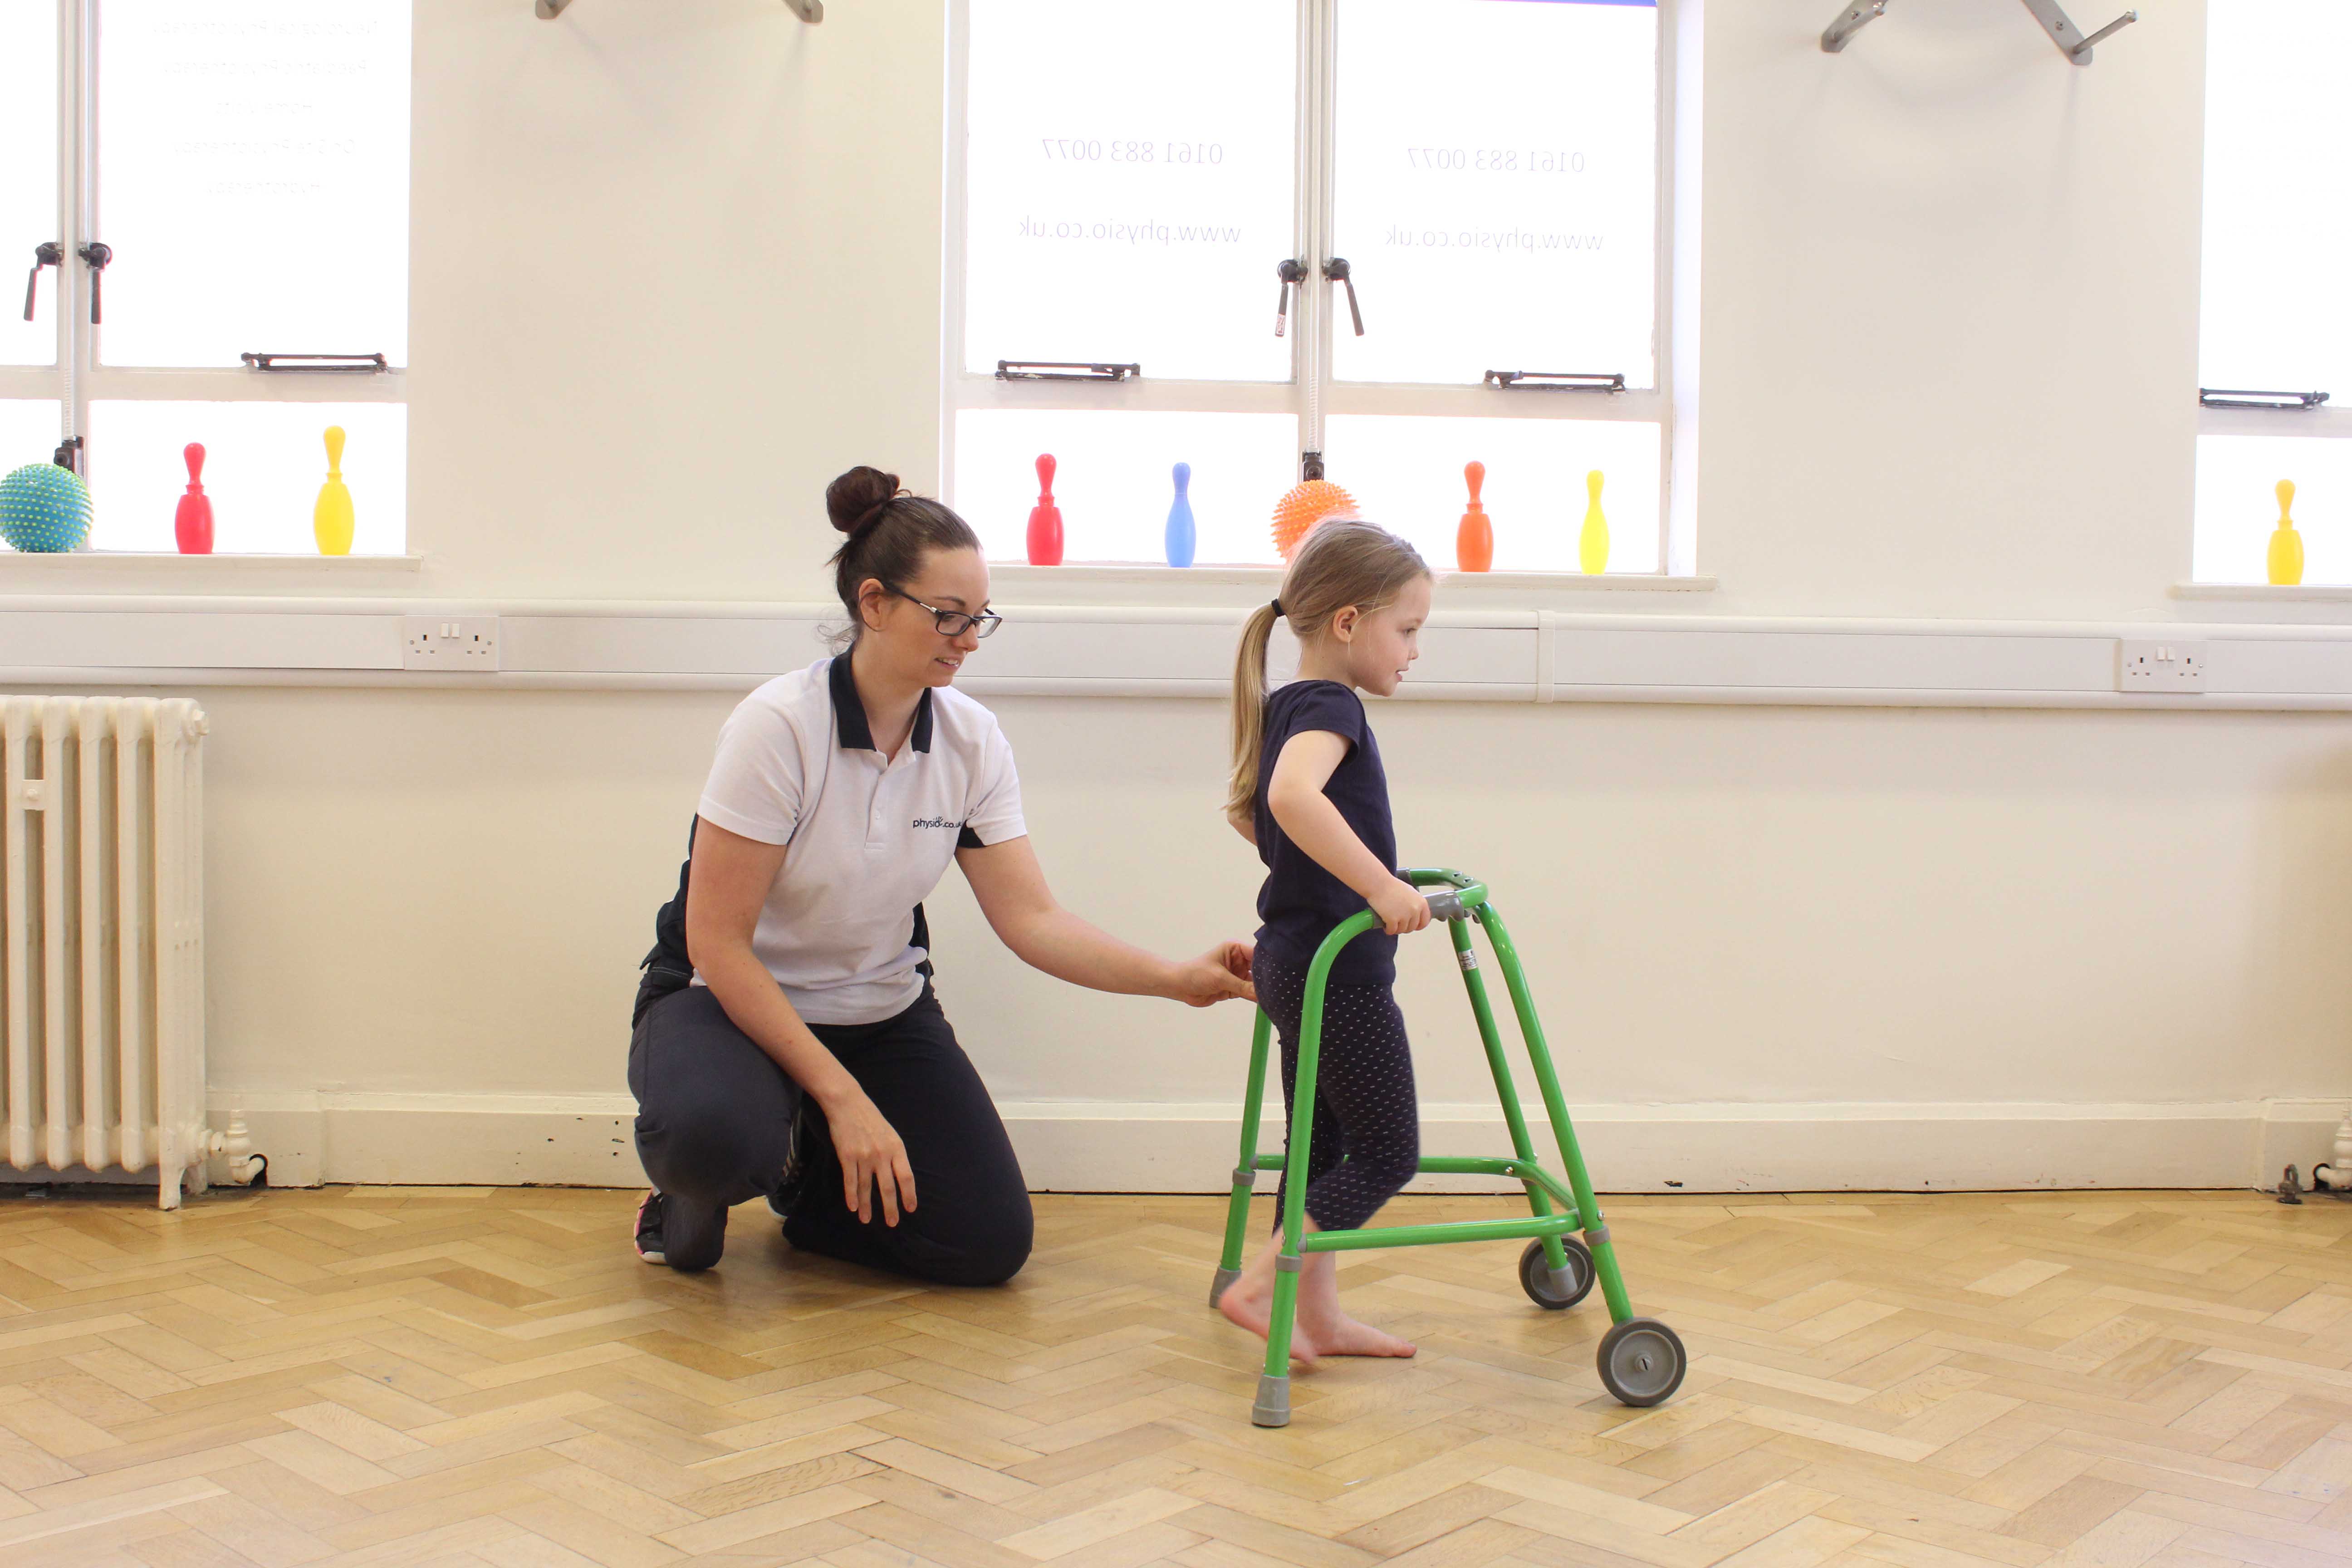 Mobility exercises supported by a trunk orthotic and wheeled walking frame